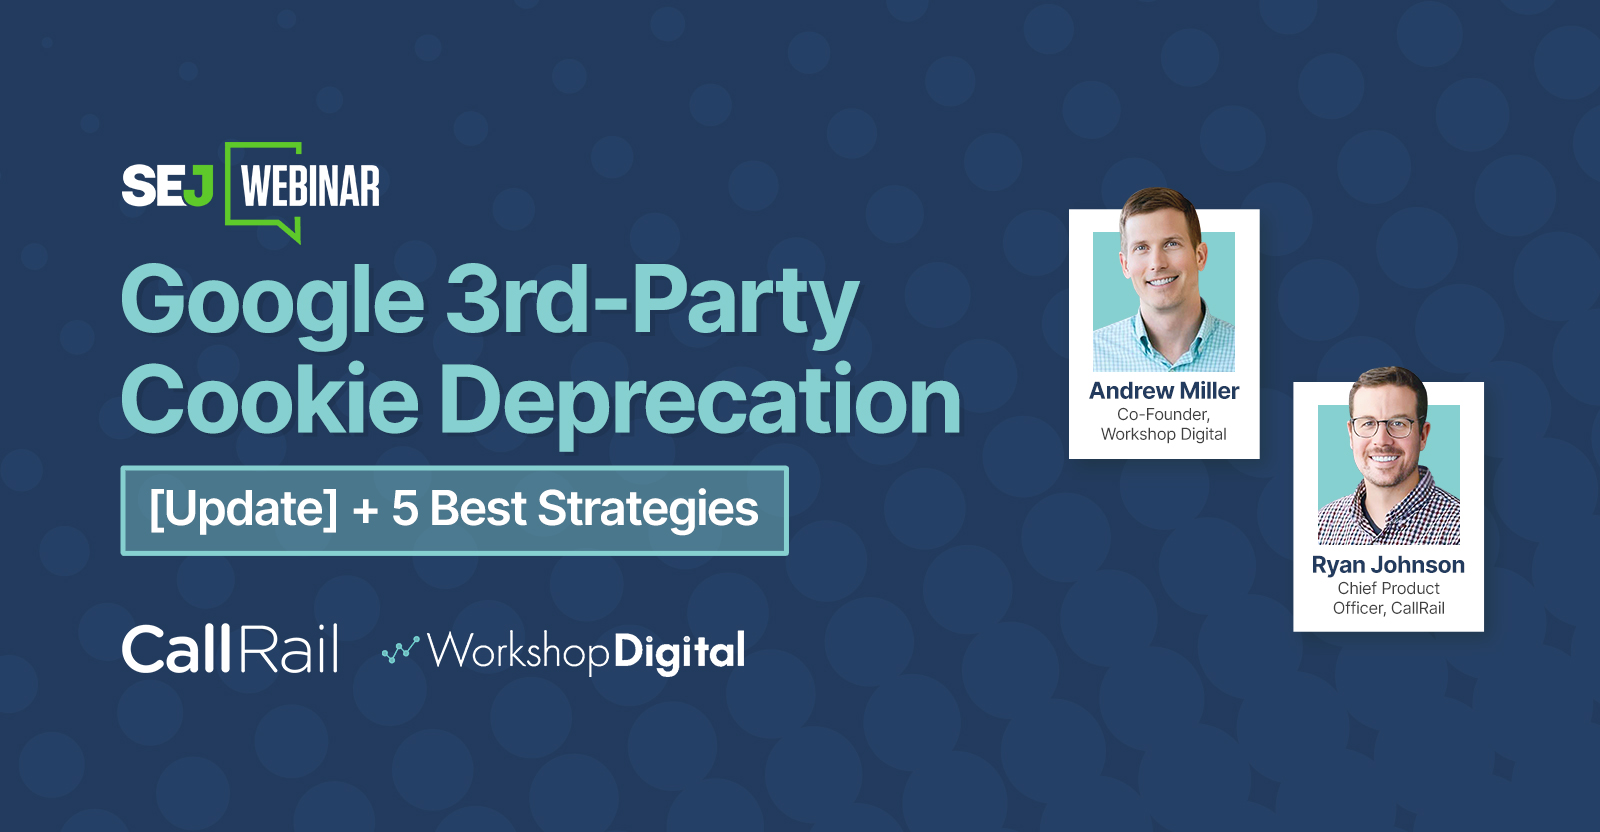 Promotional image for a SEJ webinar on Google 3rd-party cookie deprecation, featuring speakers Andrew Miller and Ryan Johnson. This session focuses on preparing a data collection strategy with company logos for Call